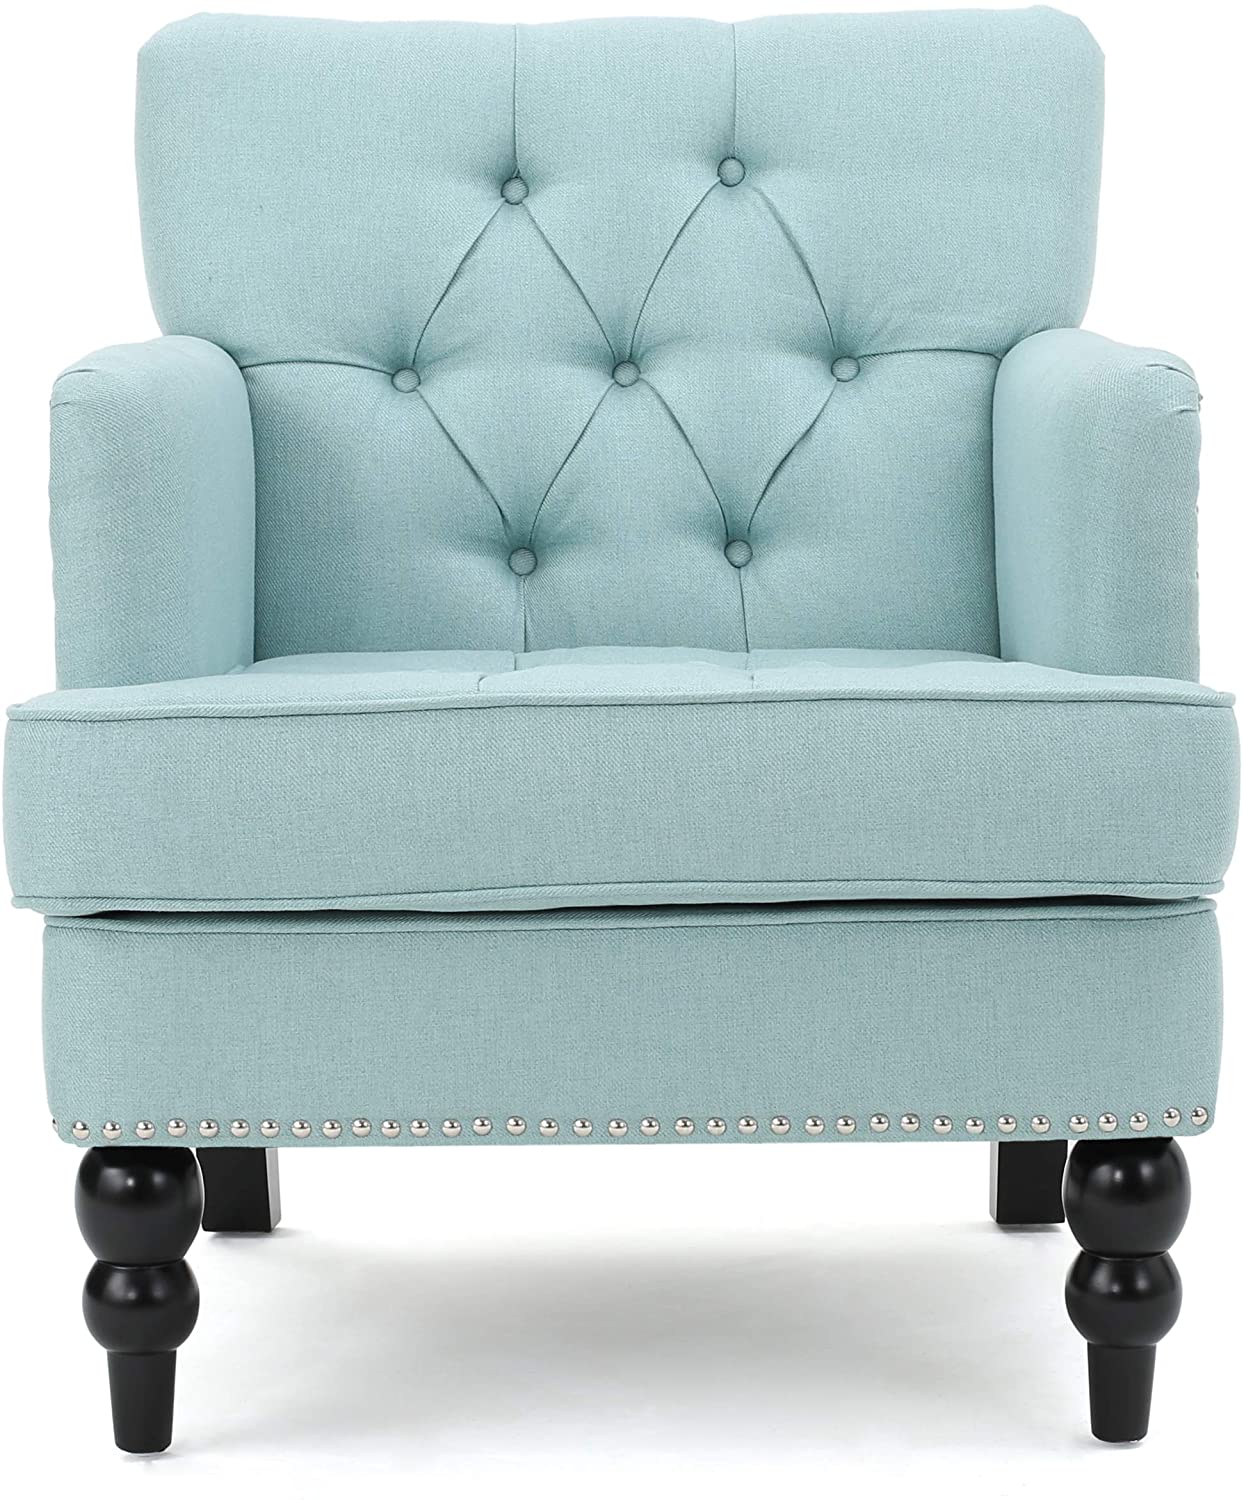 tufted accent chair